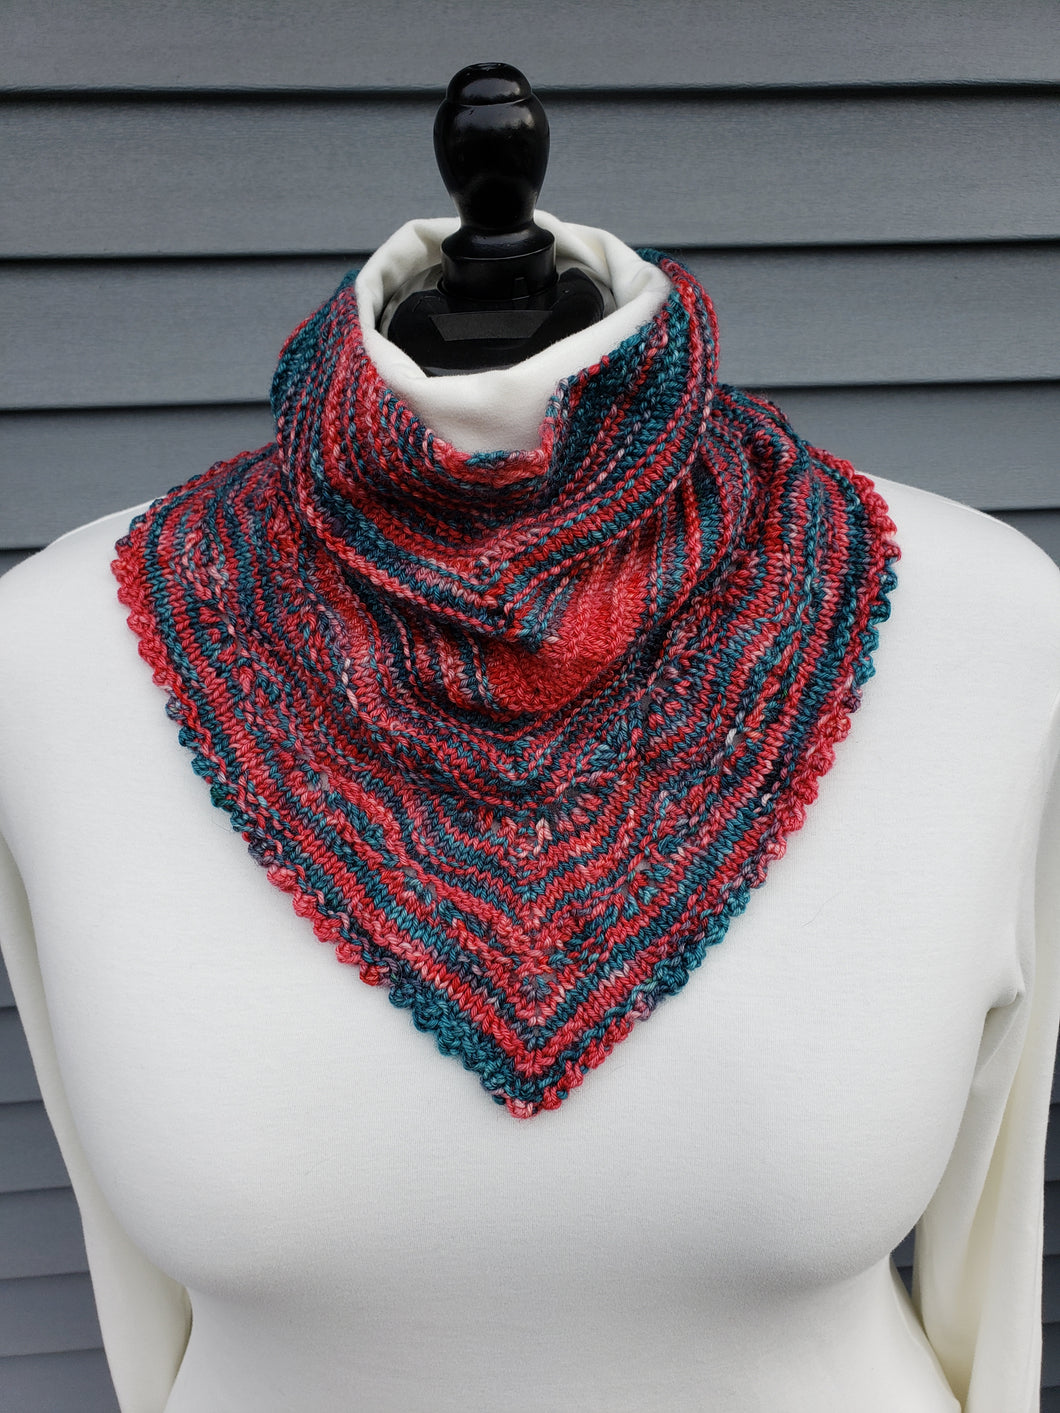 Lacy cowl in red and green variegated yarn.